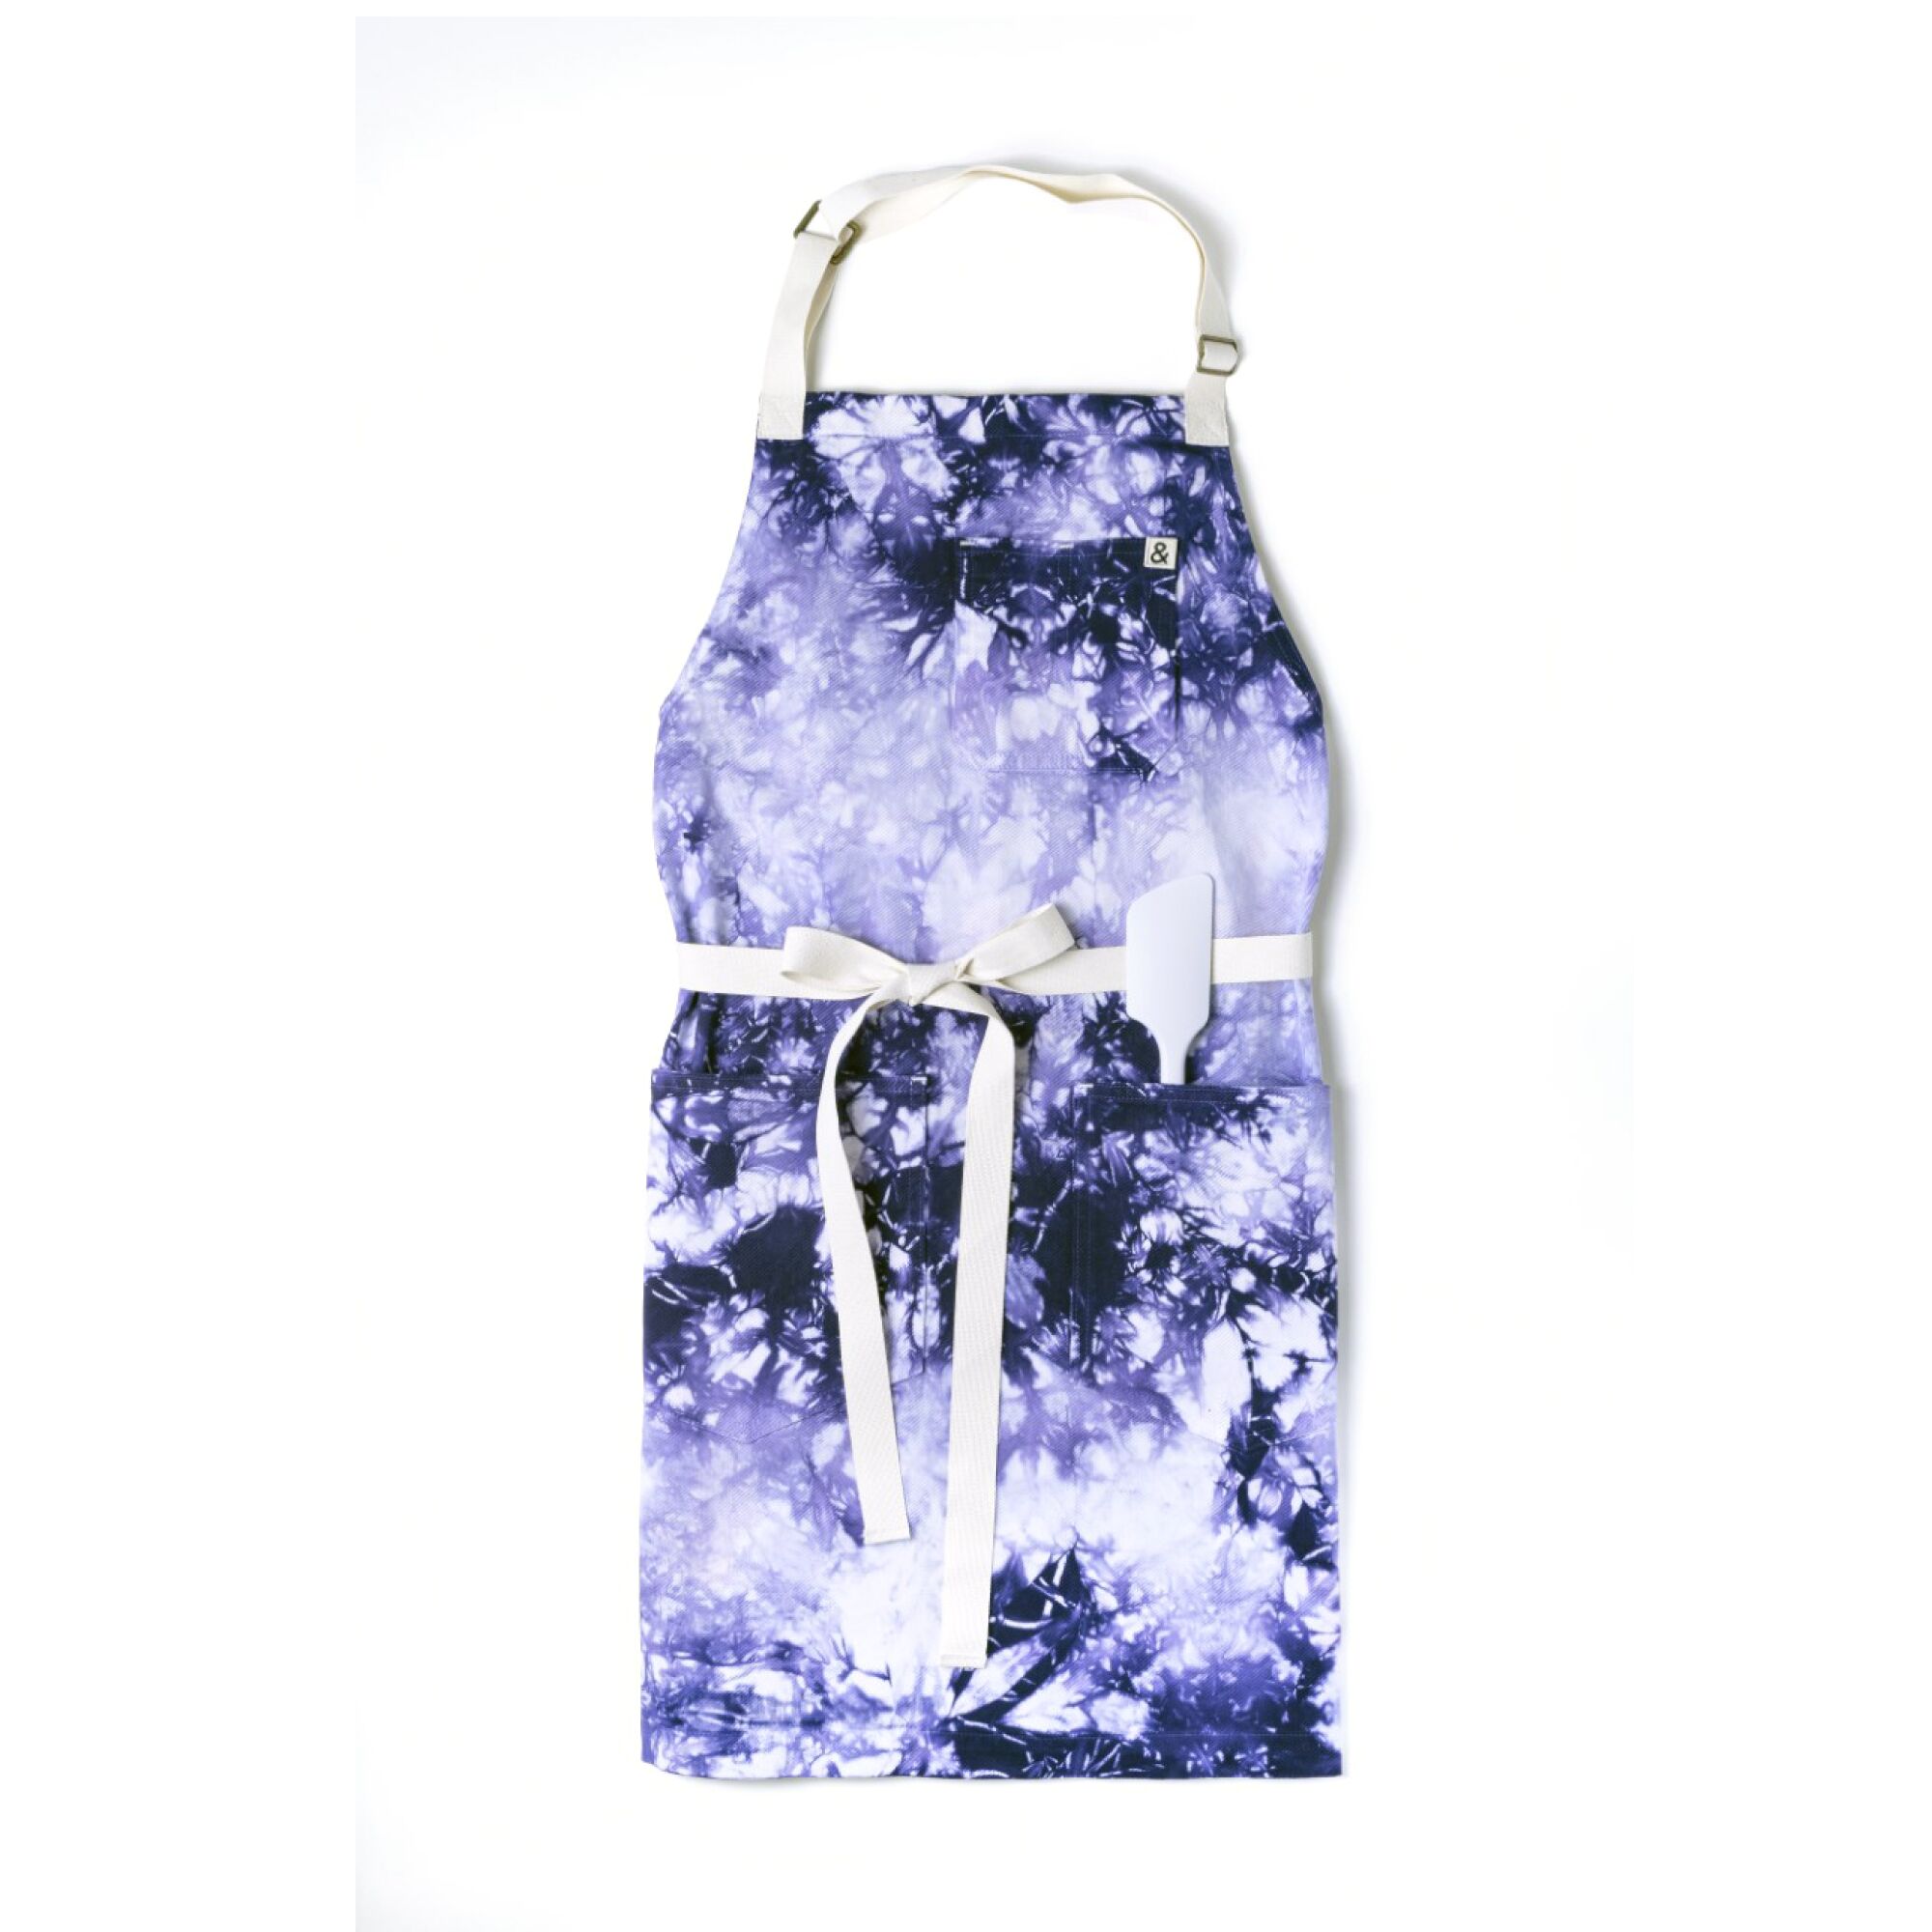 Hedley & Bennett is offering a limited-edition Sapphire tie-dye apron for the chef on your list. 